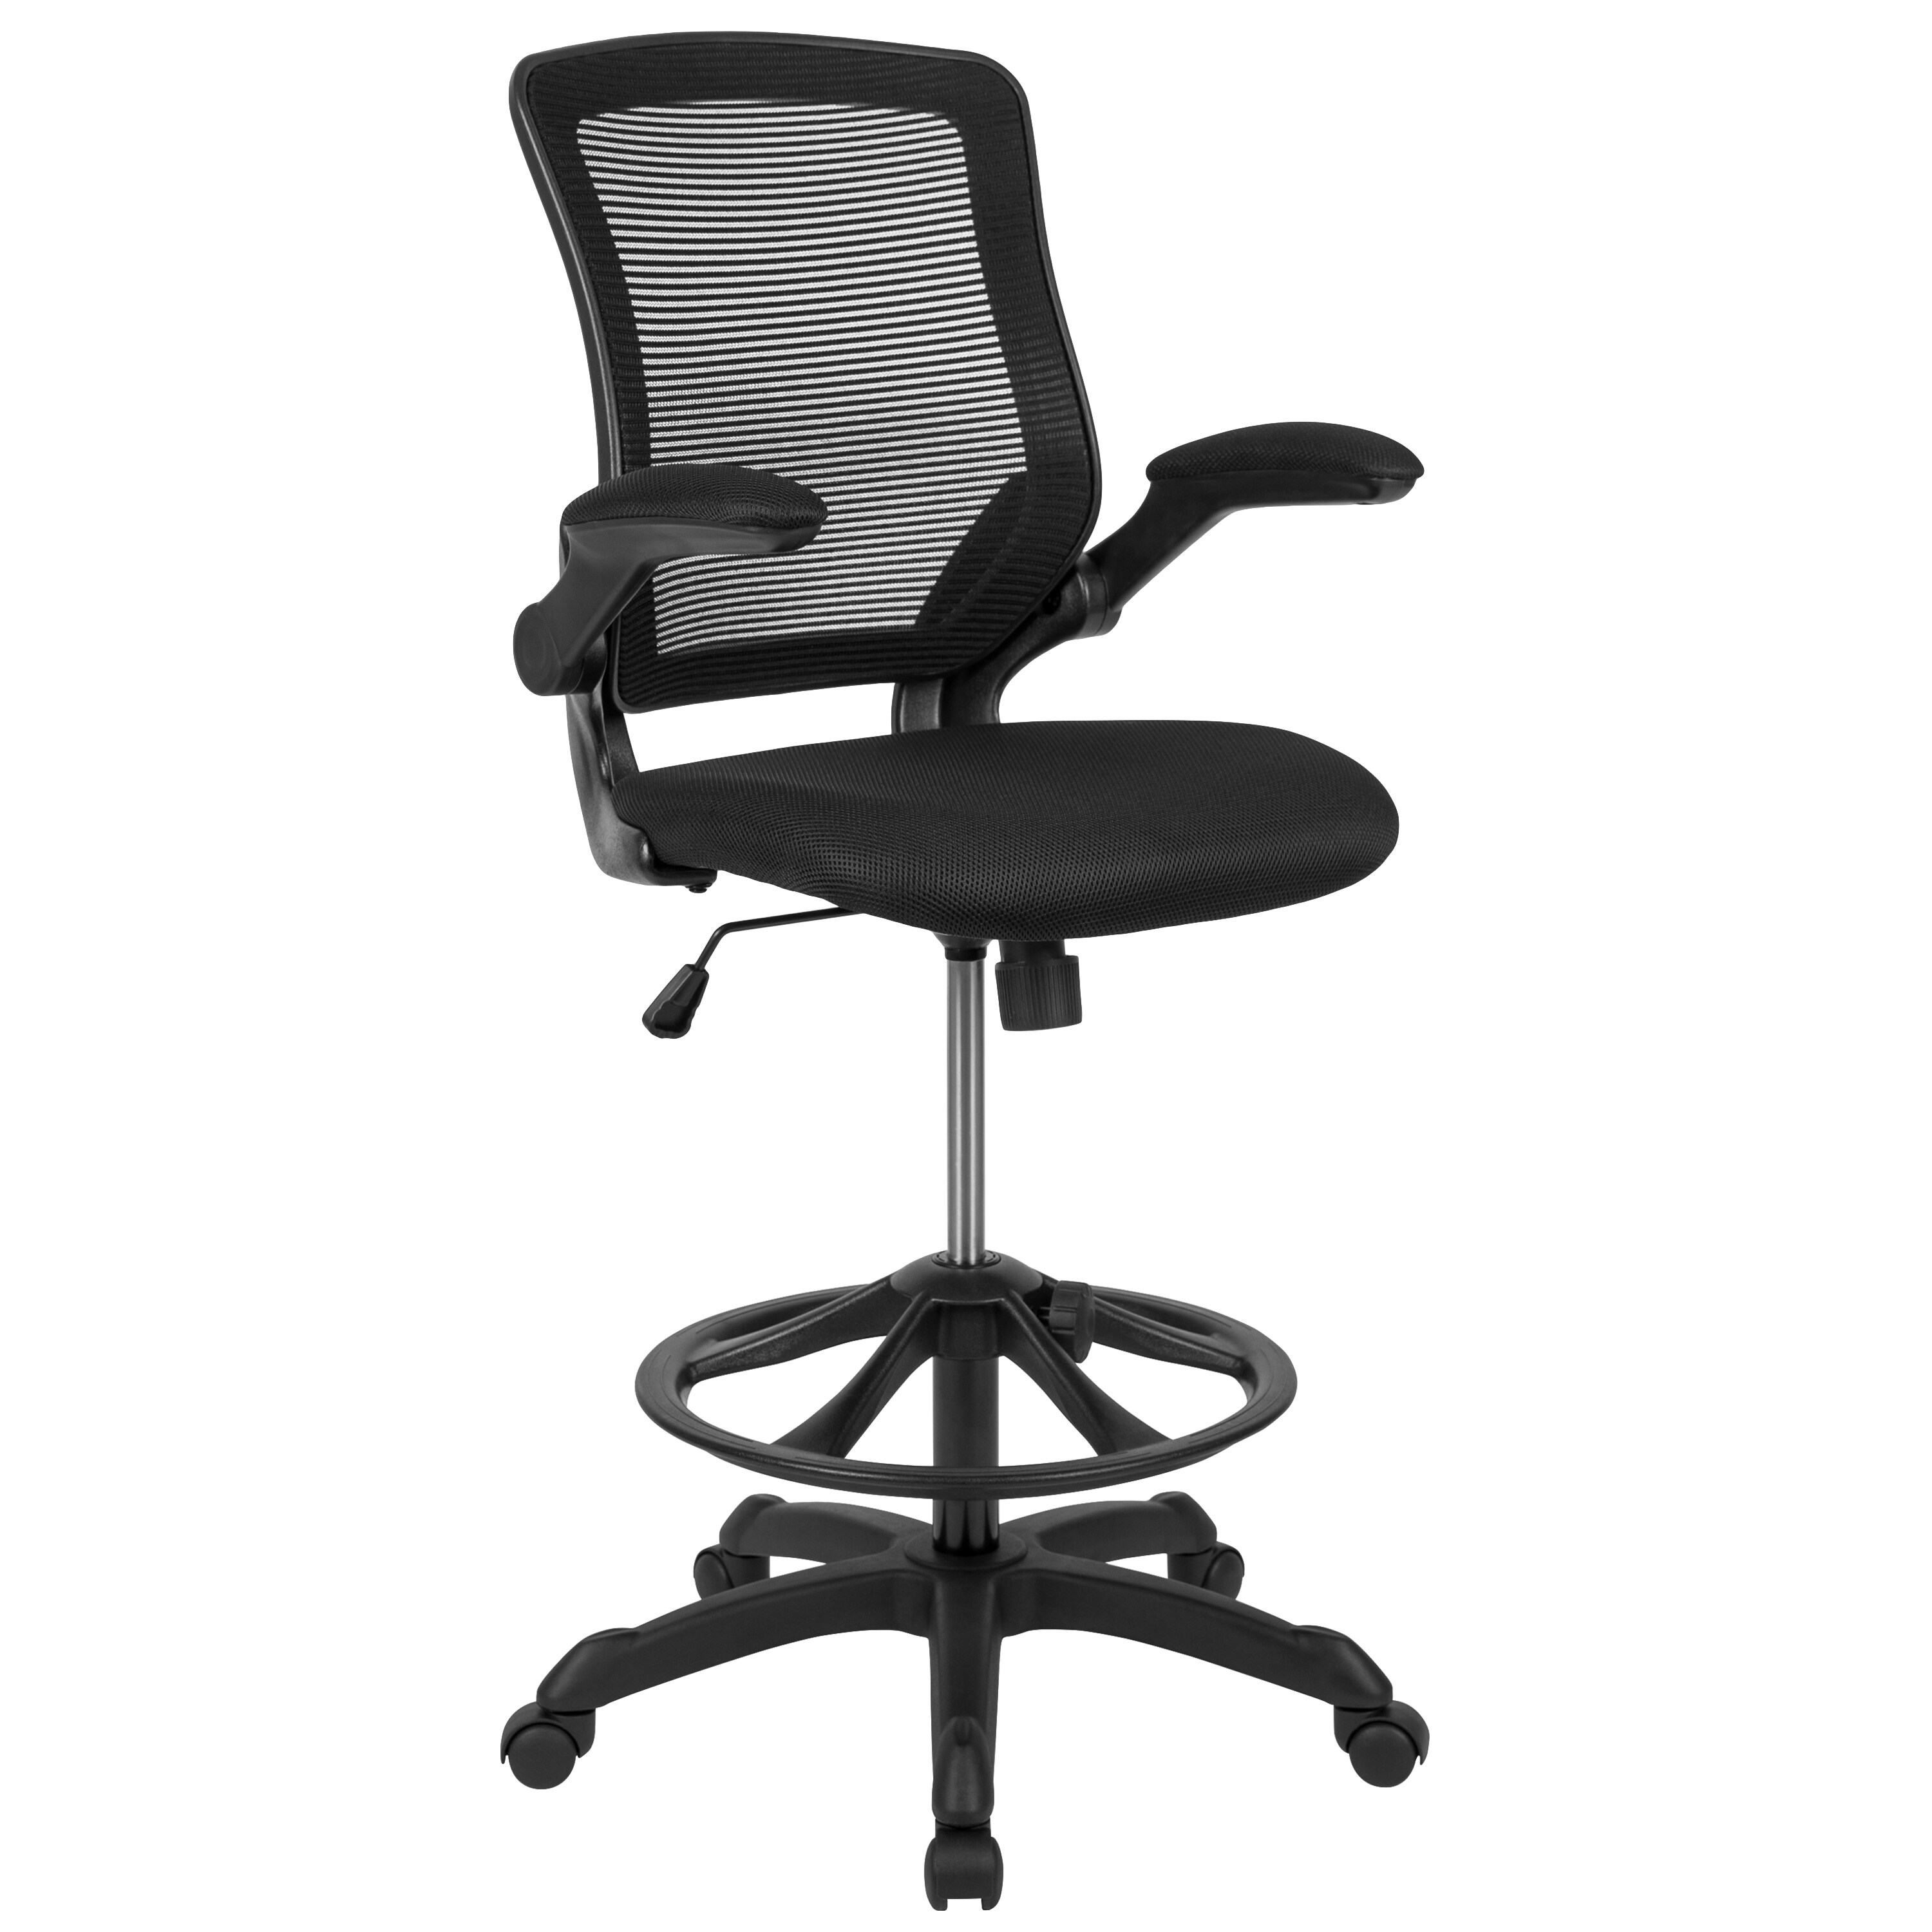 Details about   Flash Furniture Mid-Back Black Mesh Ergonomic Drafting Chair With Adjustable Foo